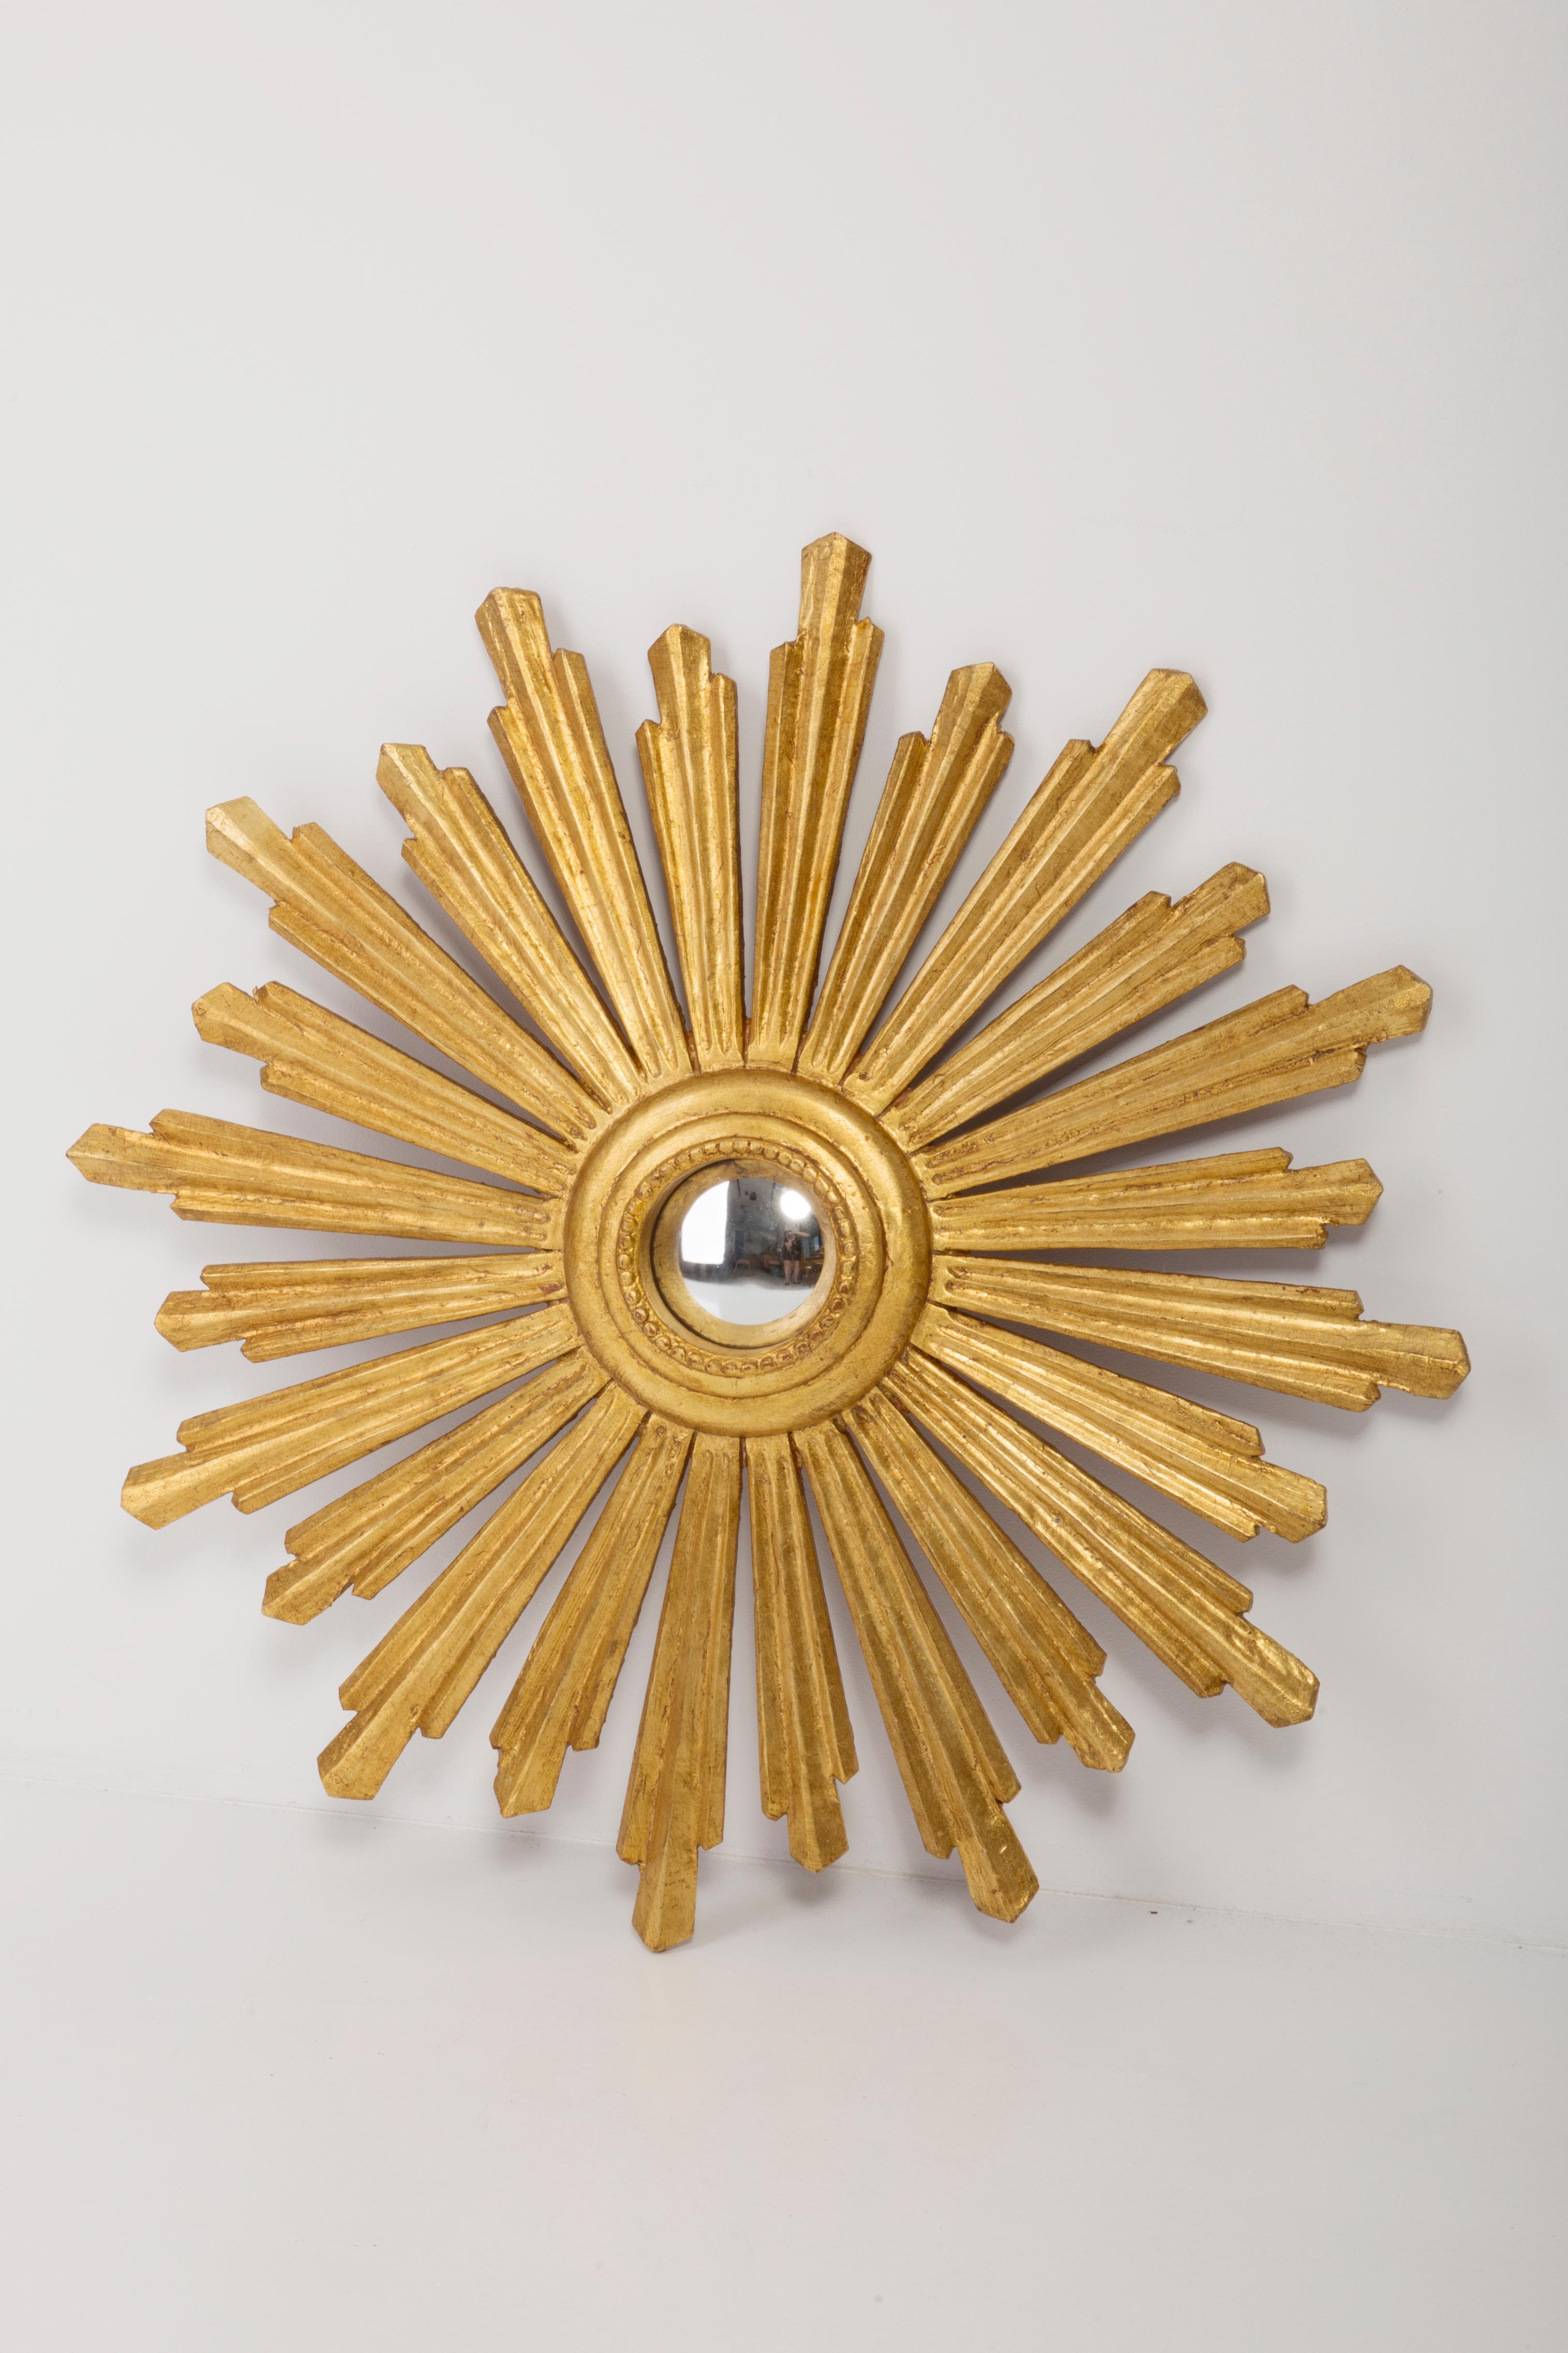 A fish-eye mirror in a golden decorative sun-shaped frame from Italy. The frame is made of wood. Good condition, no damage or cracks in the frame, the mirror pane has minimal flaws. Beautiful piece for every interior! Absolutely unique. Mirror size: